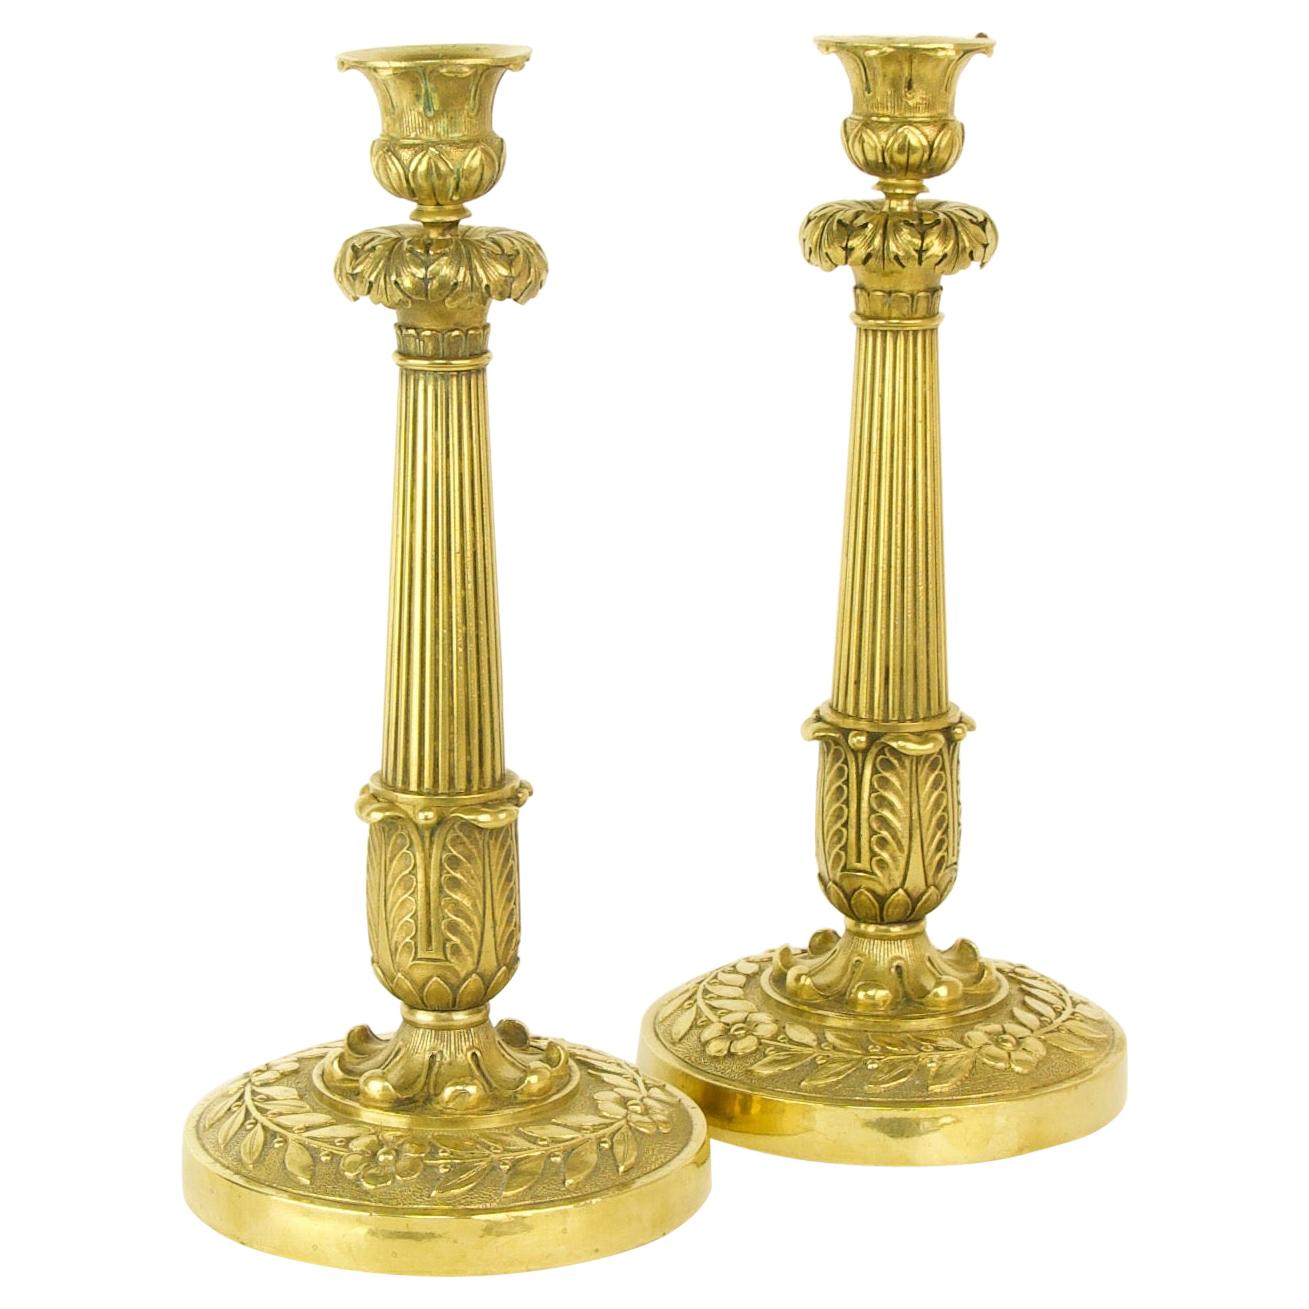 Pair of French Early 19th Century Empire Gilt-Bronze Candlesticks, circa 1820 For Sale